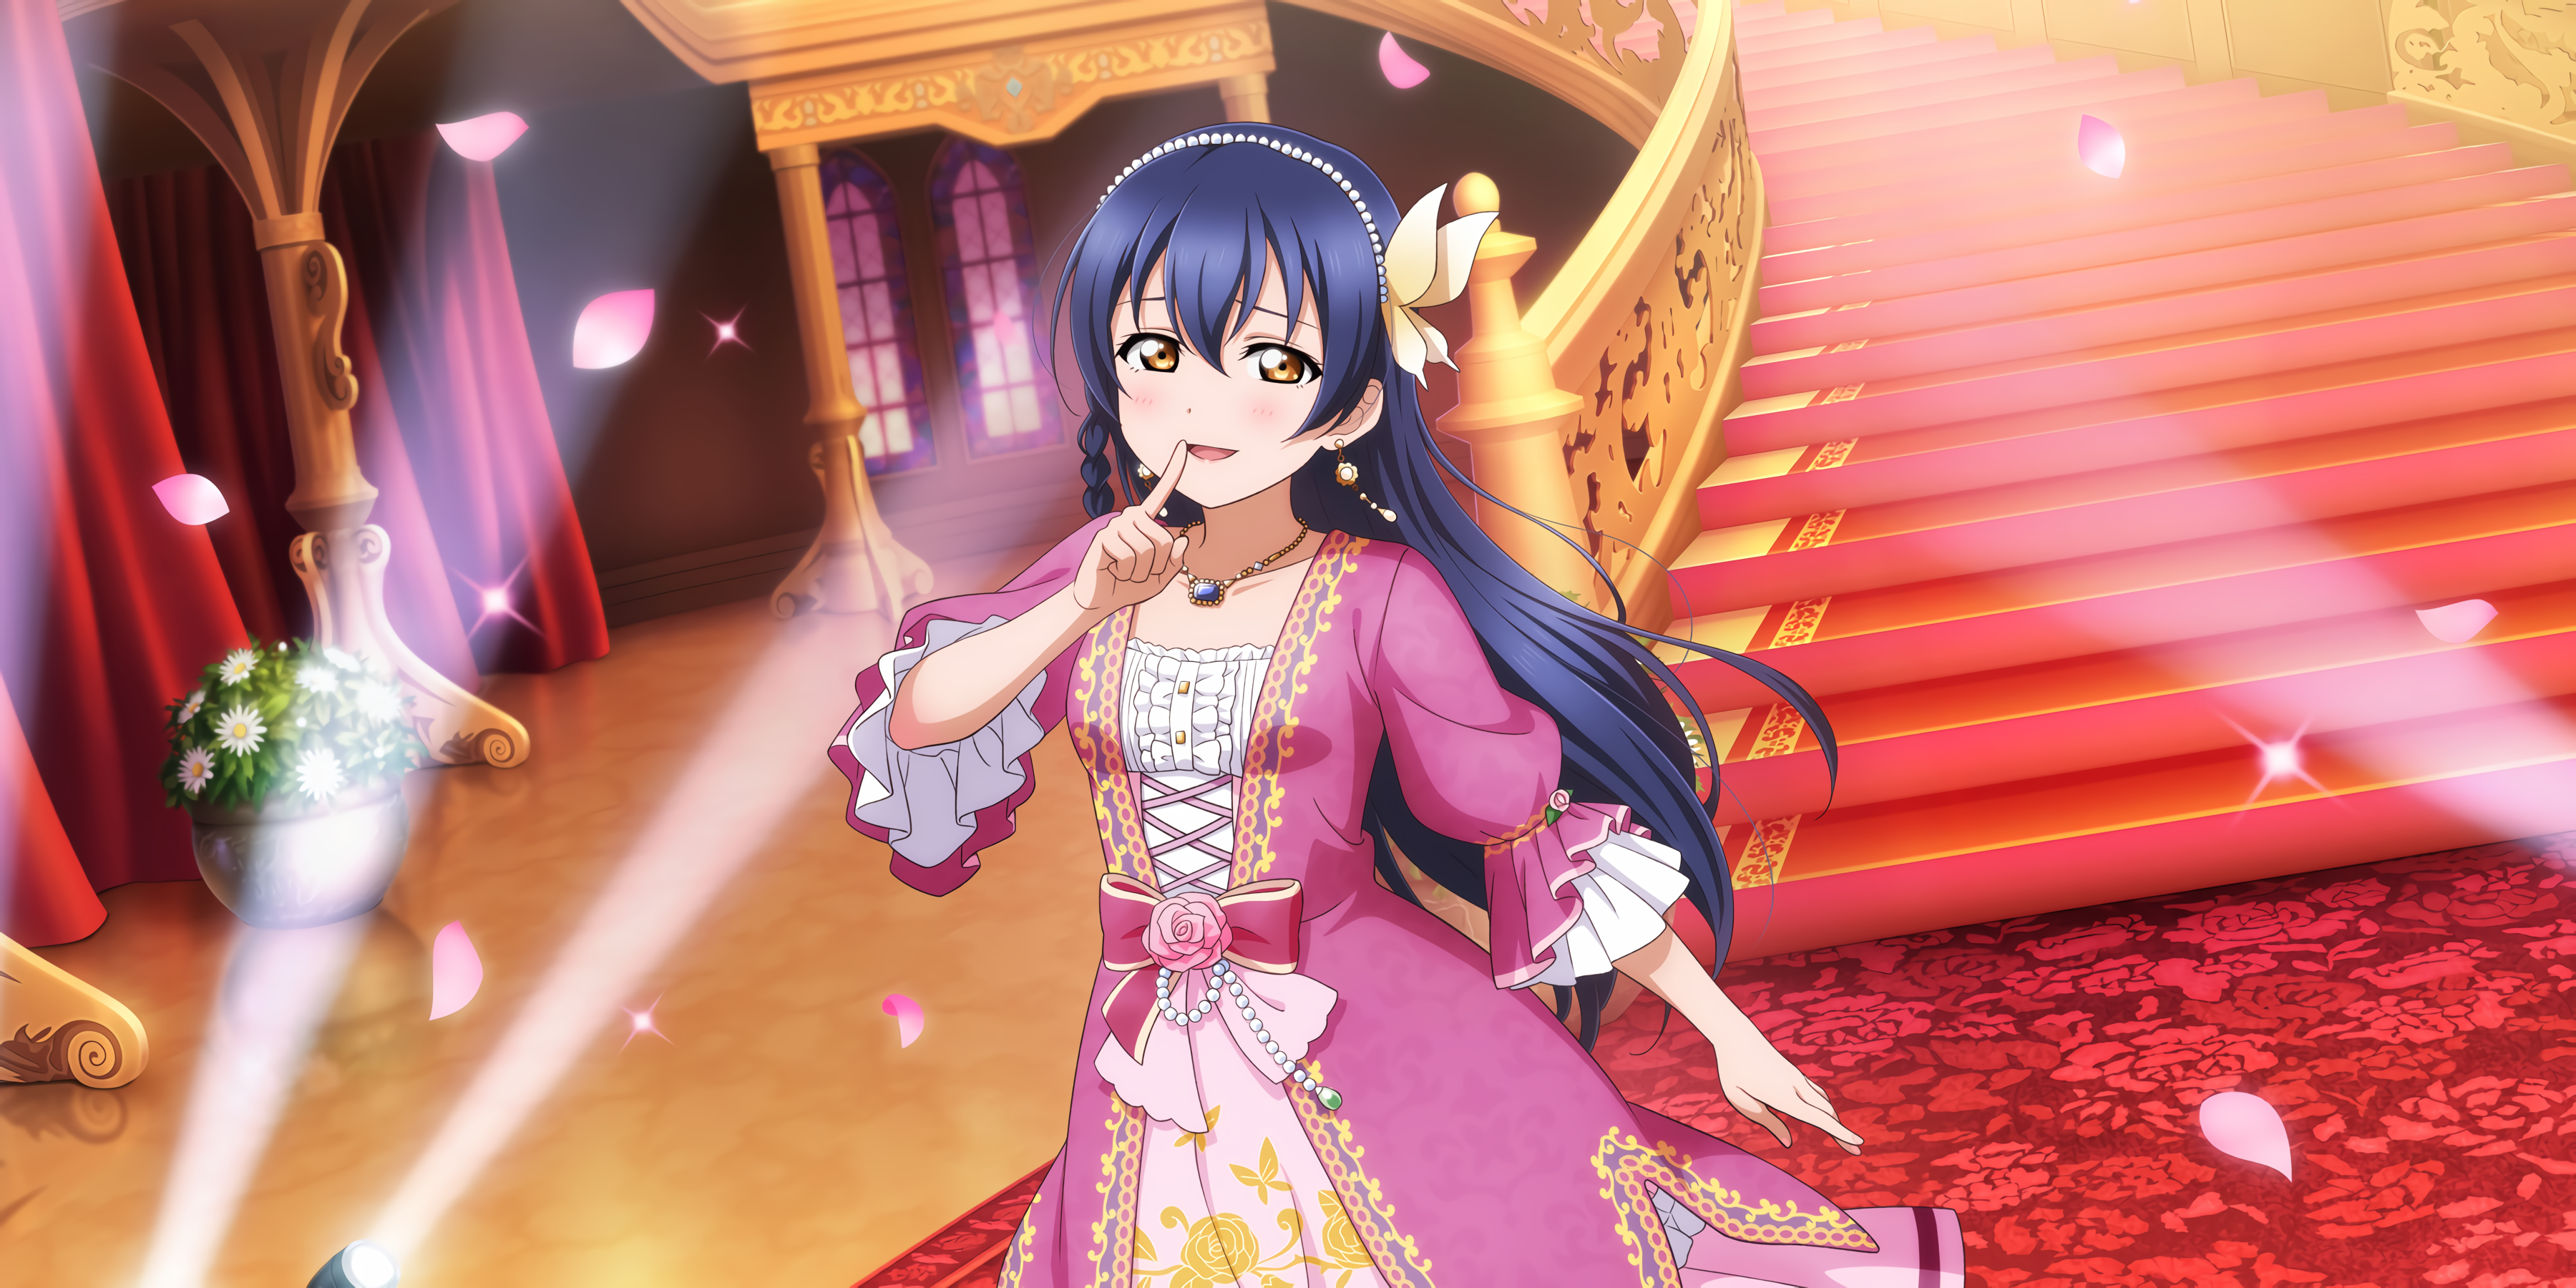 Sonoda Umi Love Live Anime Anime Girls Petals Stairs Flowers Dress Necklace 3600x1800